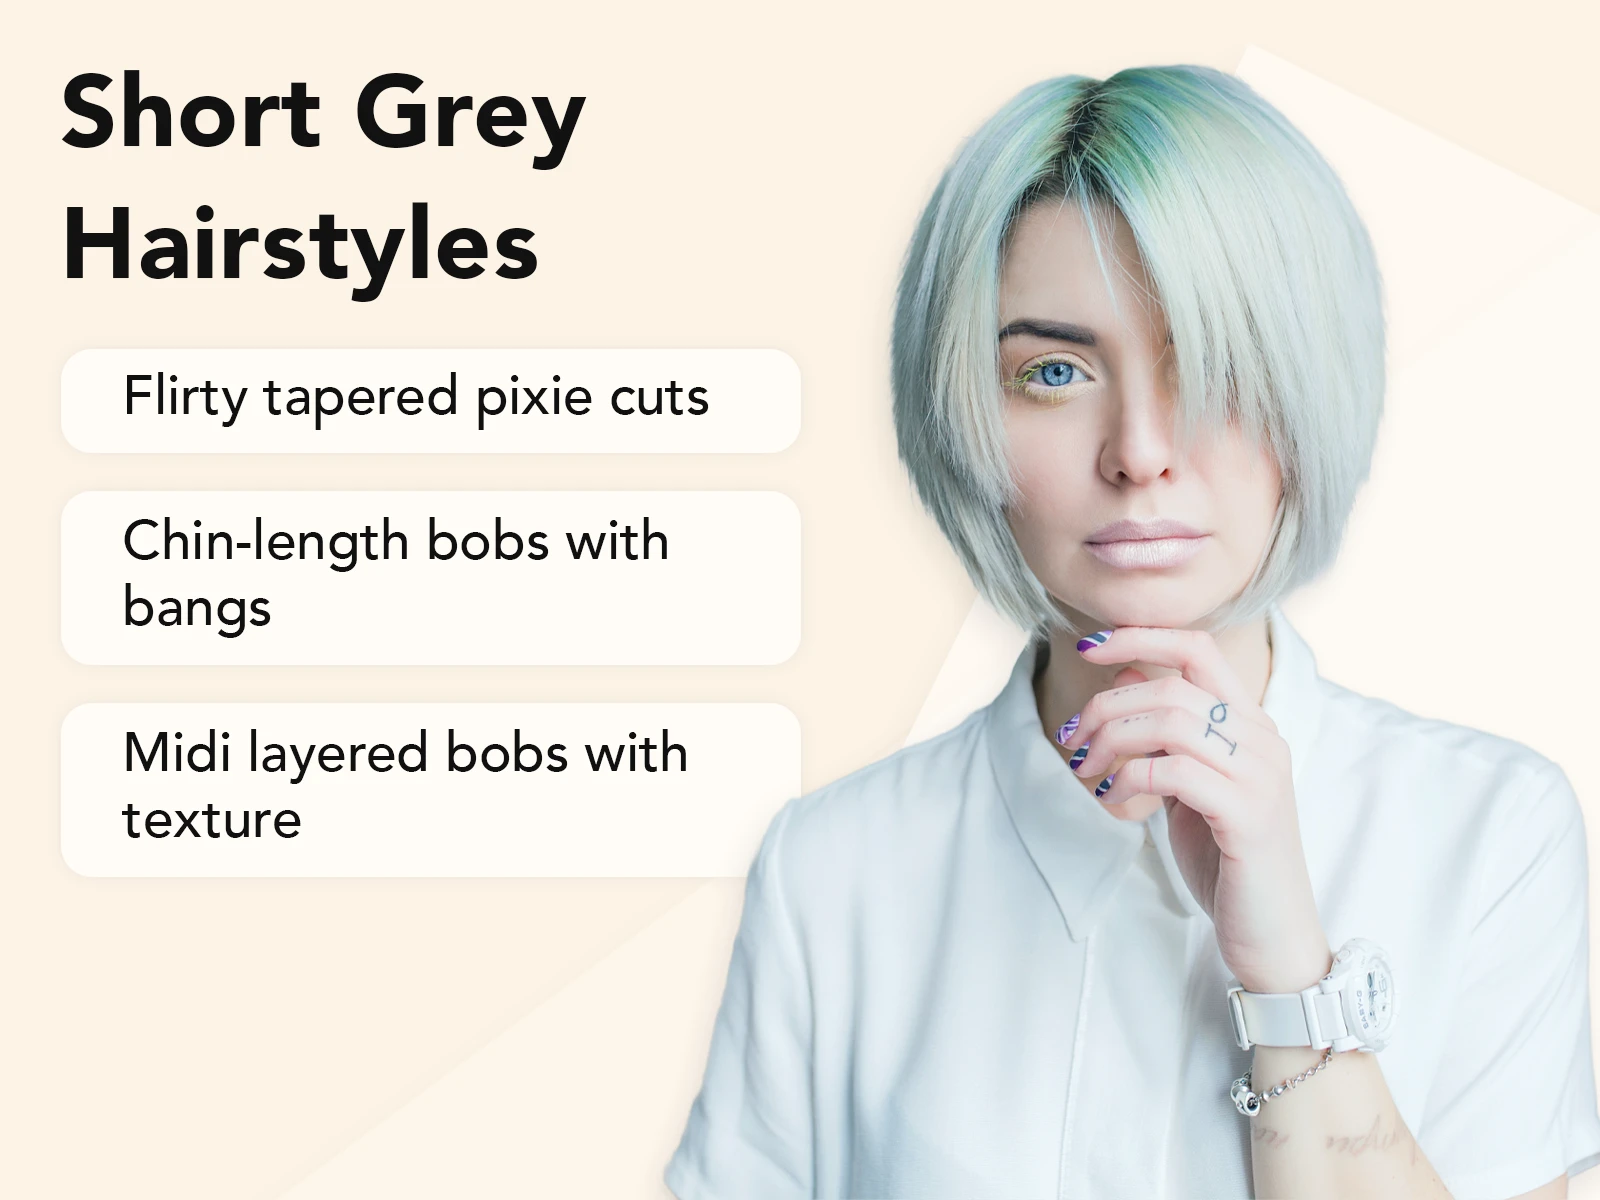 What Are Short Grey Hairstyles explainer image on a tan background